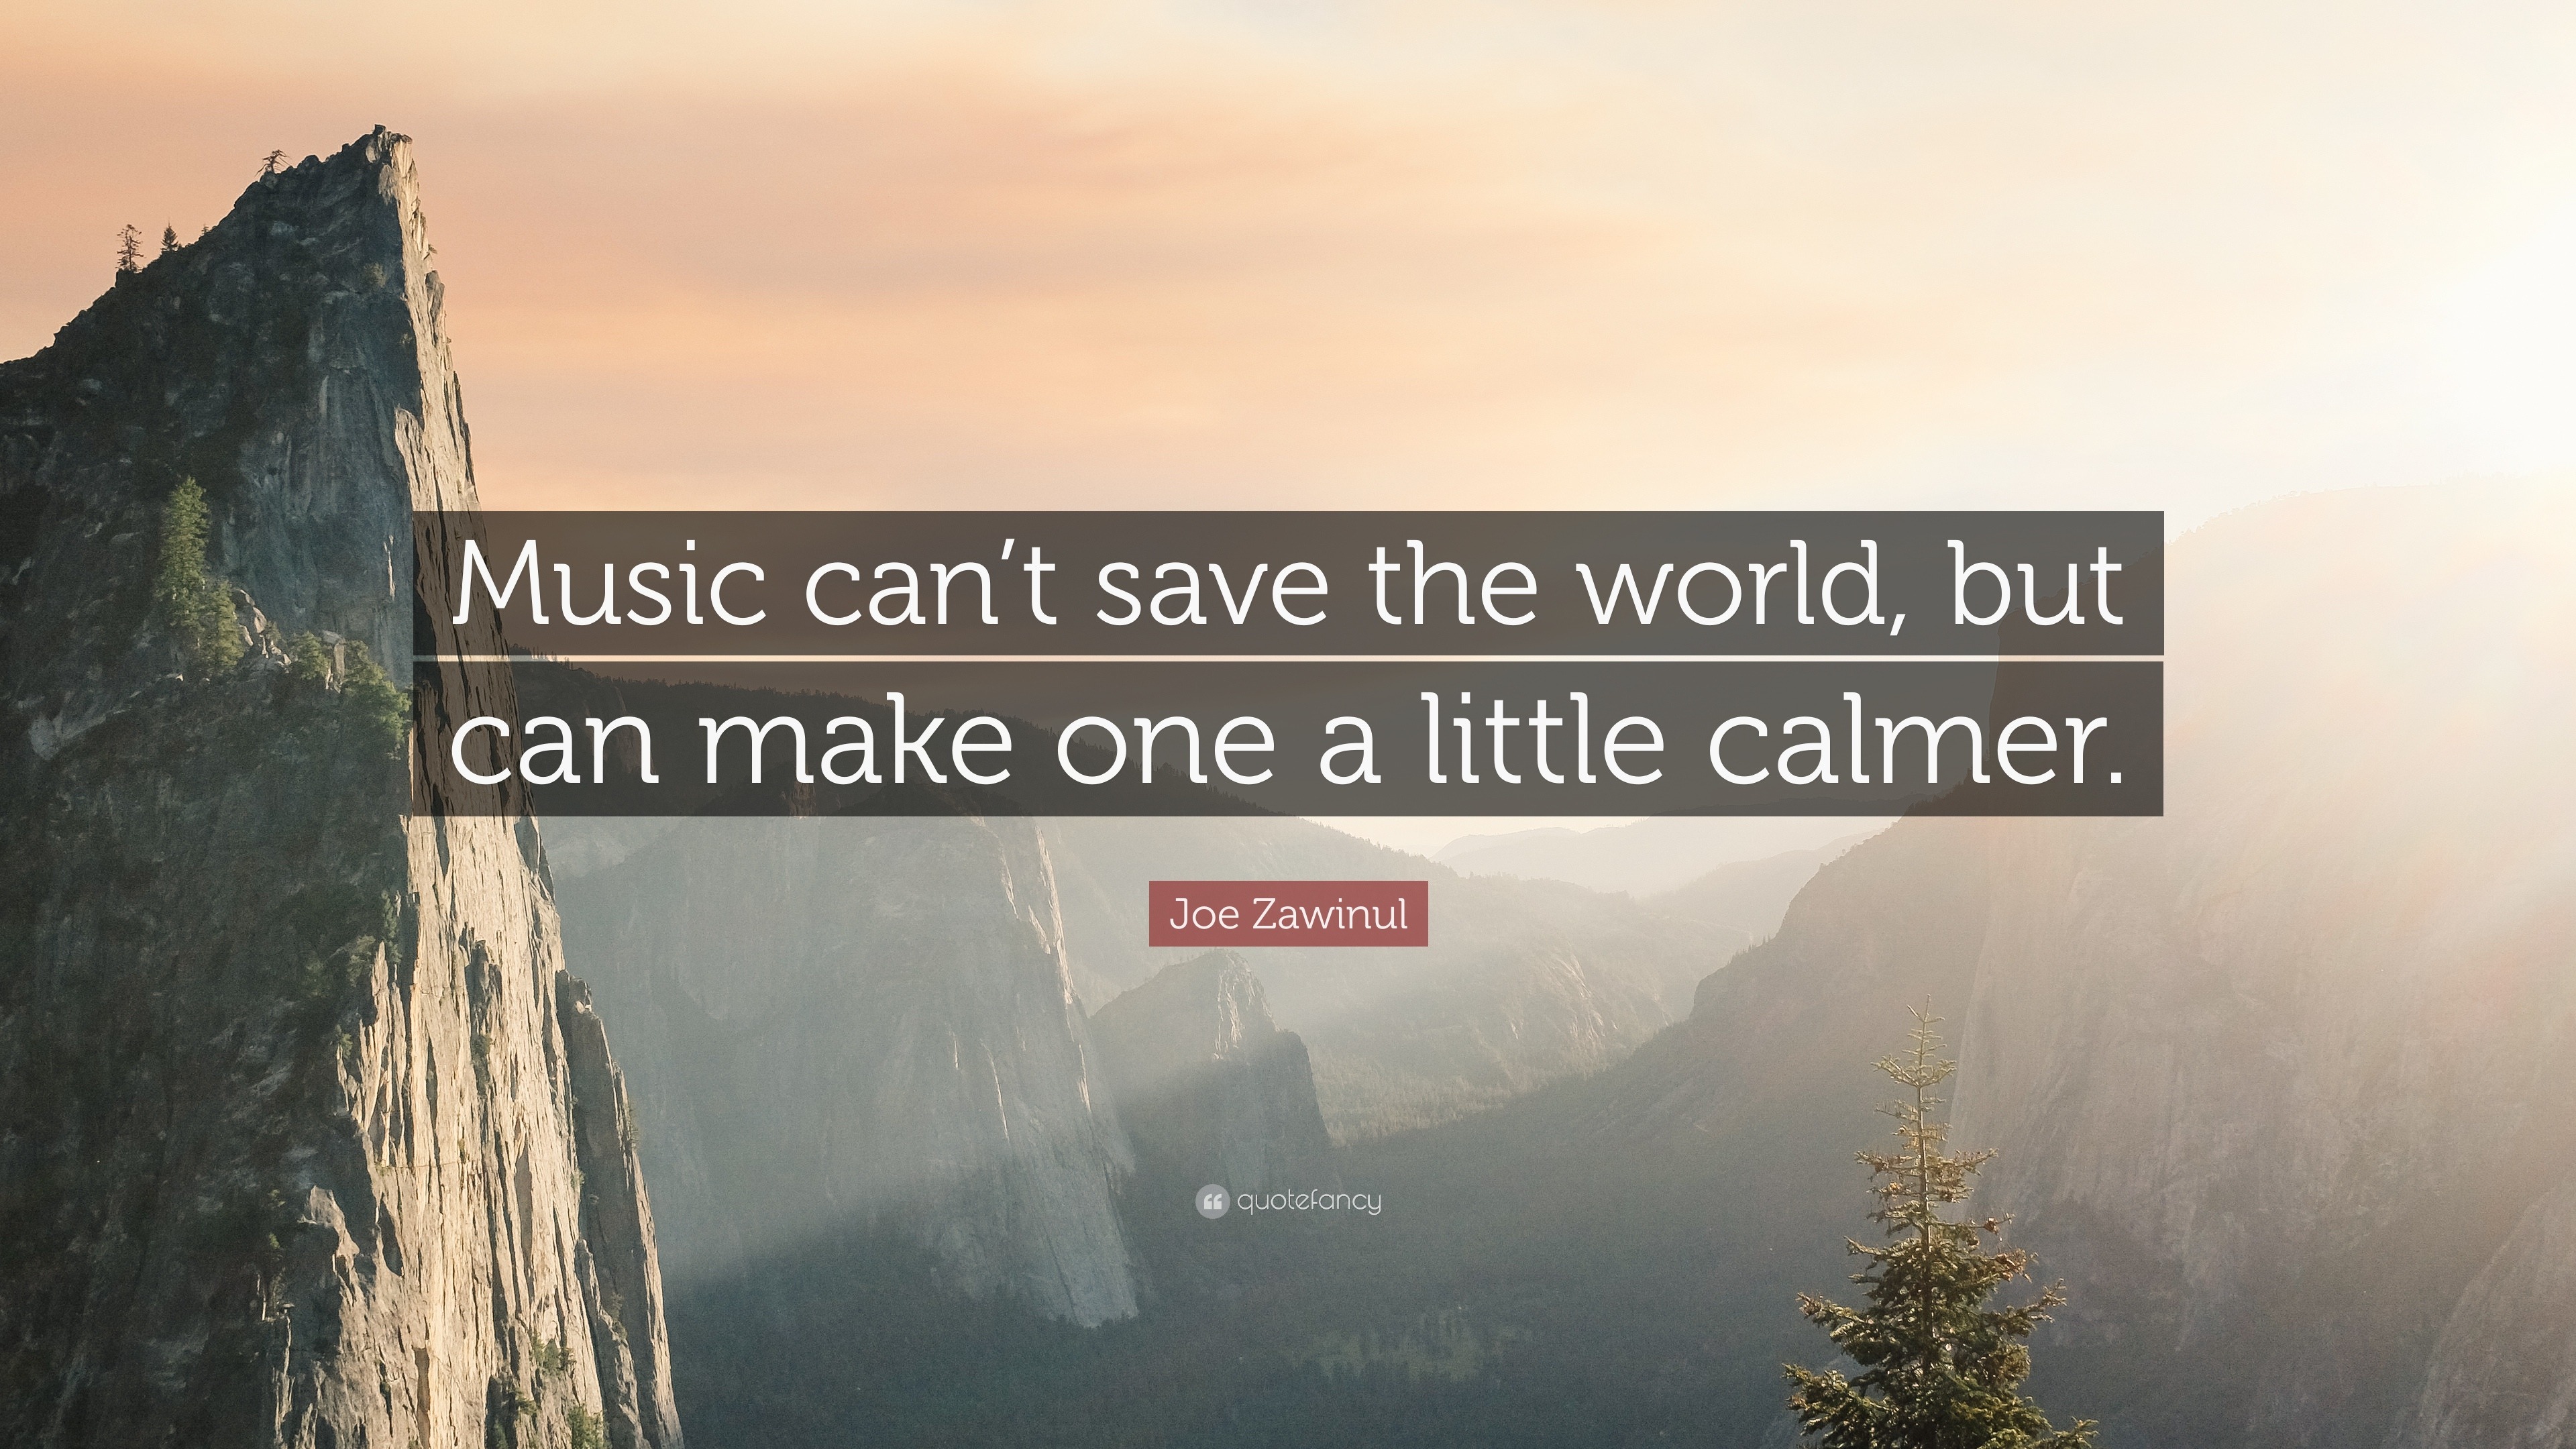 Joe Zawinul Quote Music Can T Save The World But Can Make One A Little Calmer